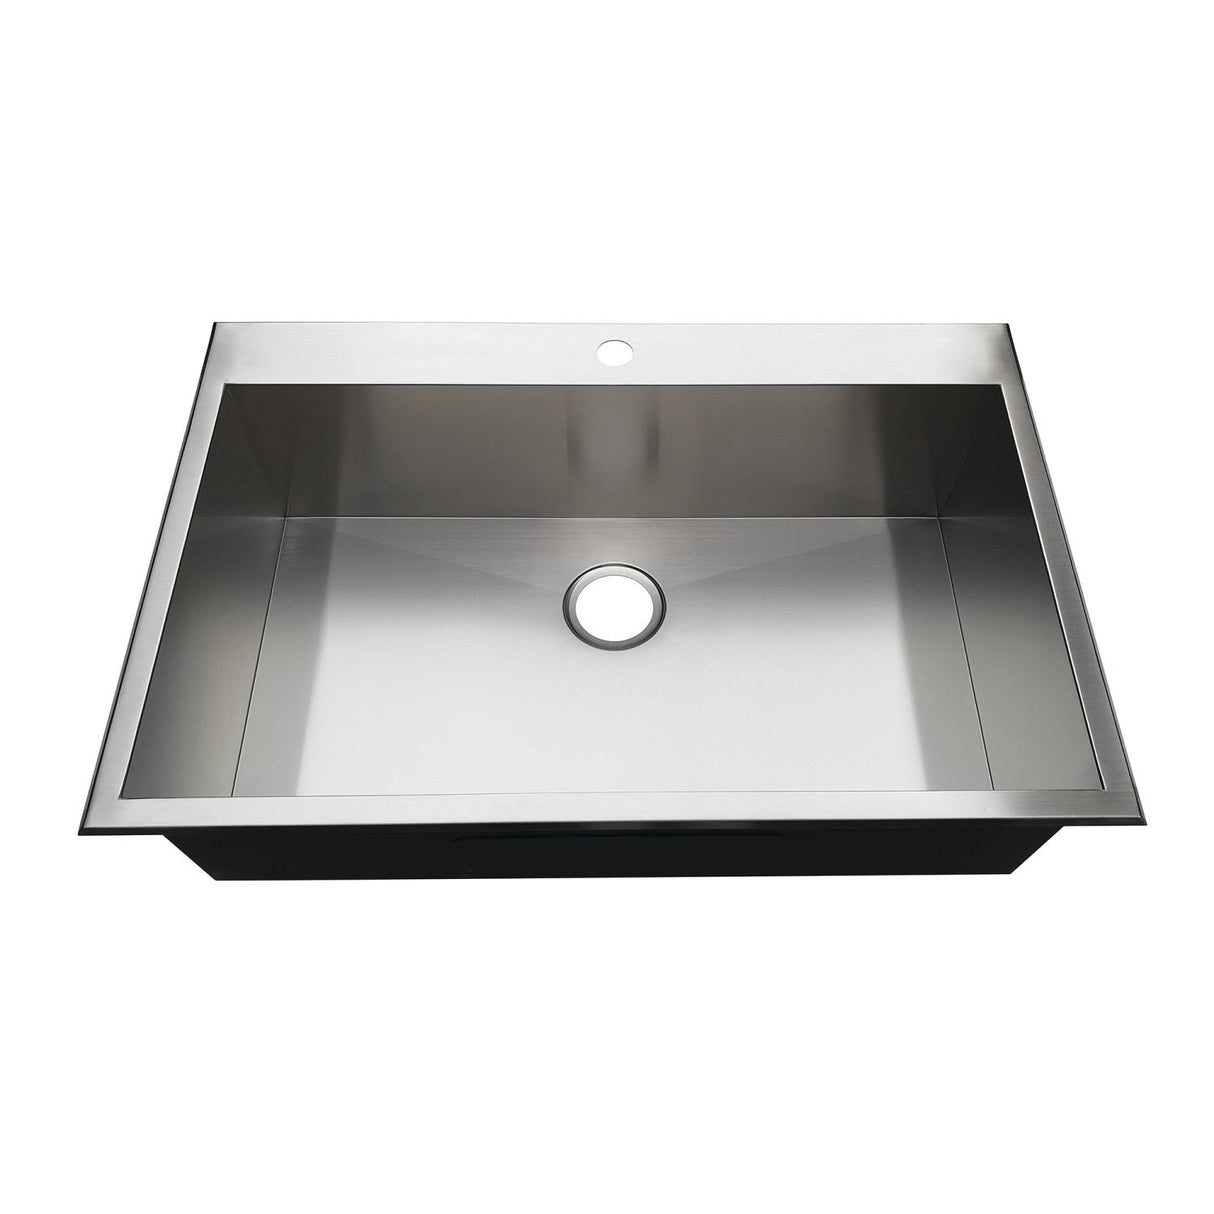 Uptowne KDS332291BN 33-Inch Stainless Steel Self-Rimming 1-Hole Single Bowl Drop-In Kitchen Sink, Brushed